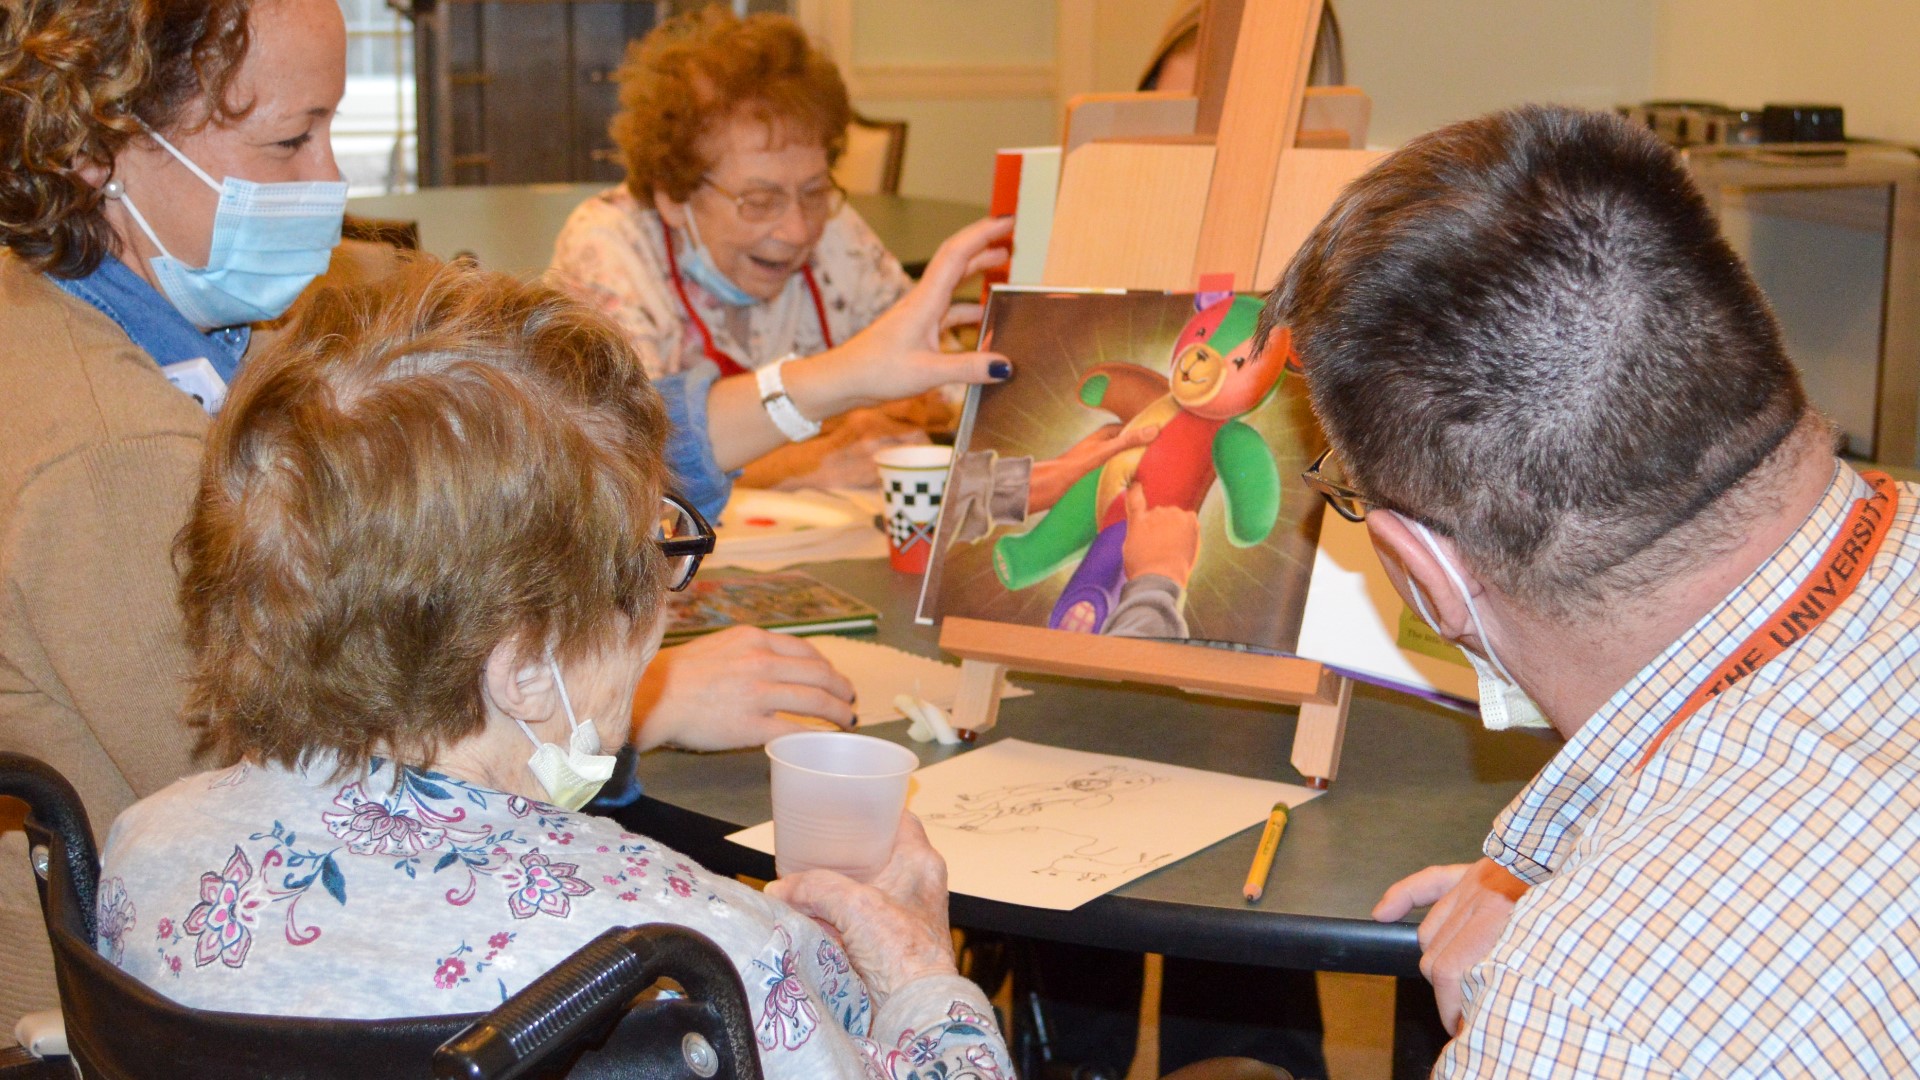 The event allows the residents to be inspired by art, activity and social engagement.